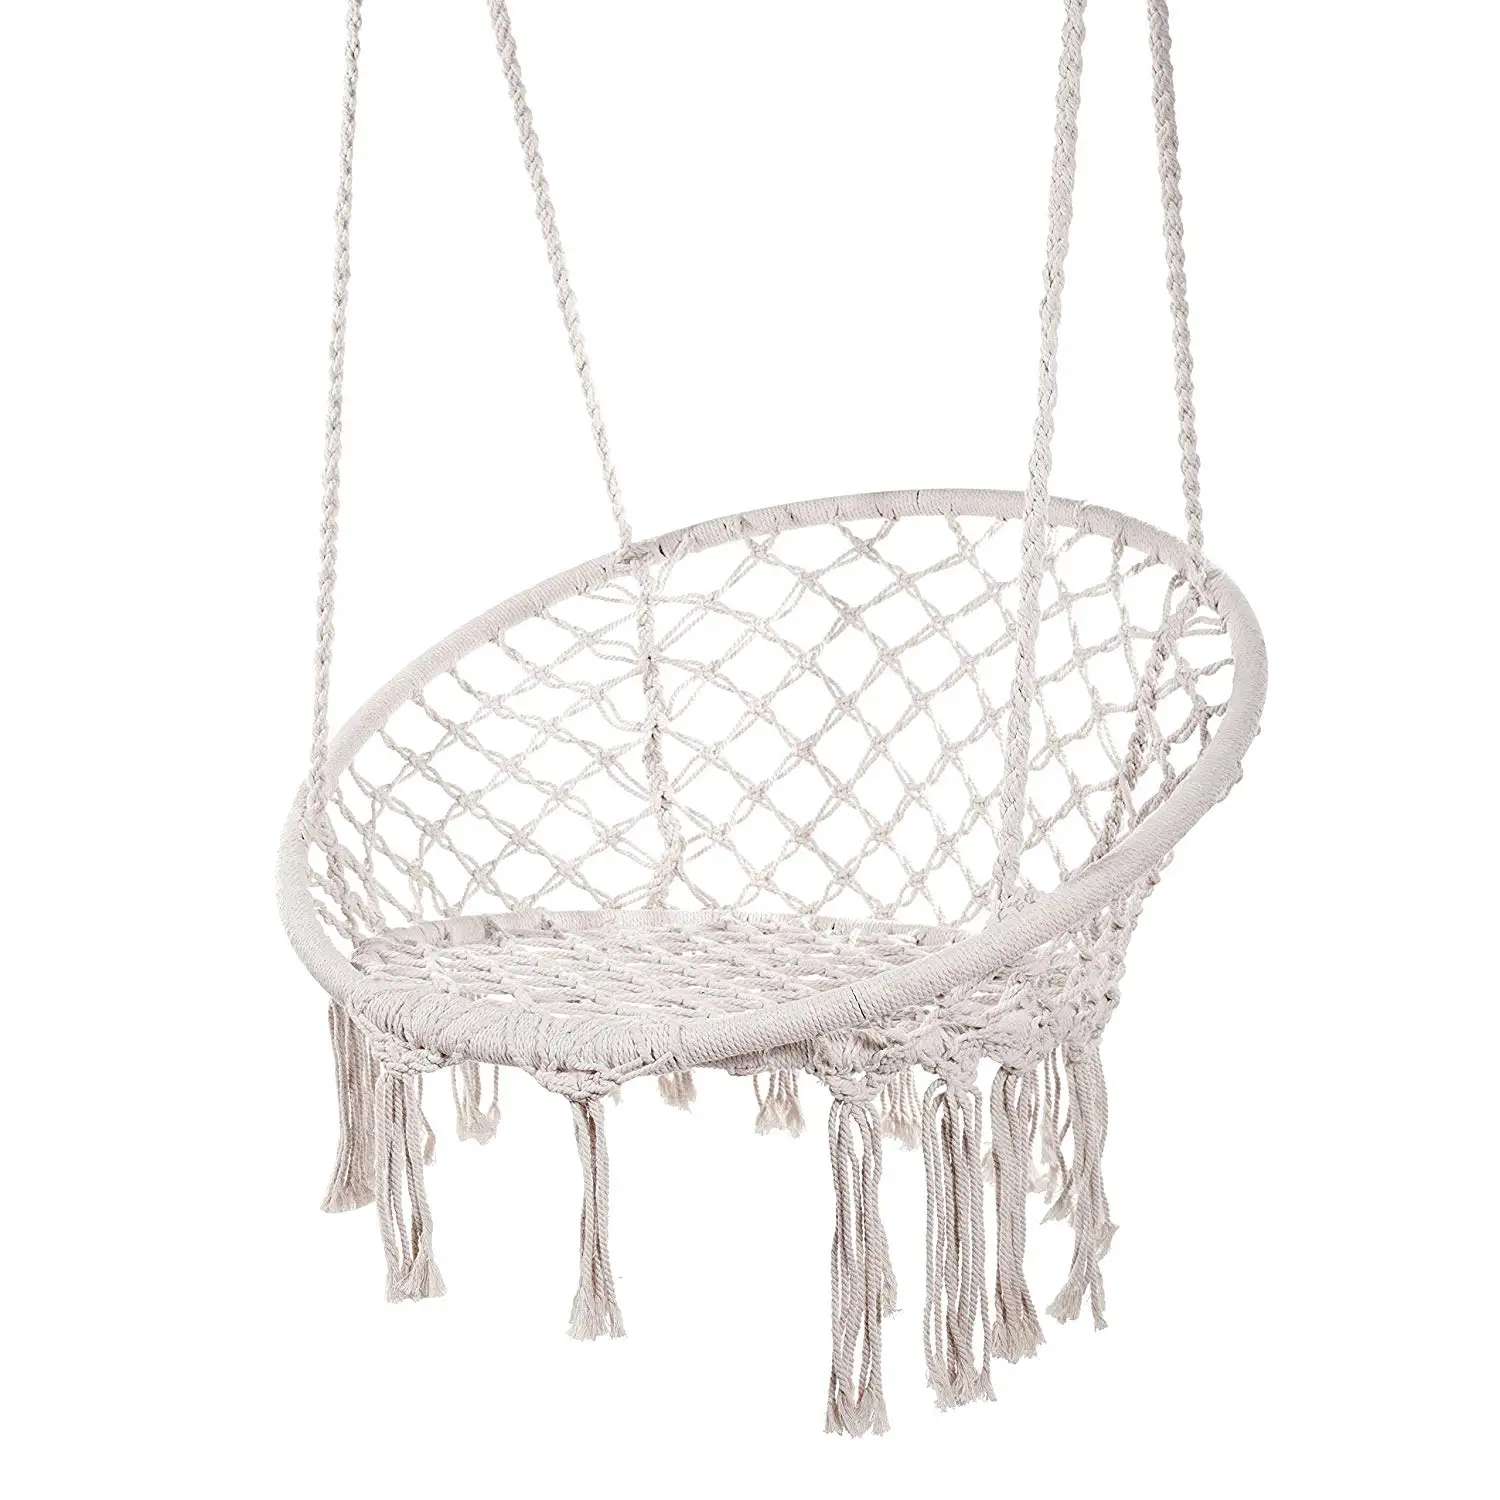 Hanging Rope Hammock Lounger Chair Macrame Porch Swing For Indoor